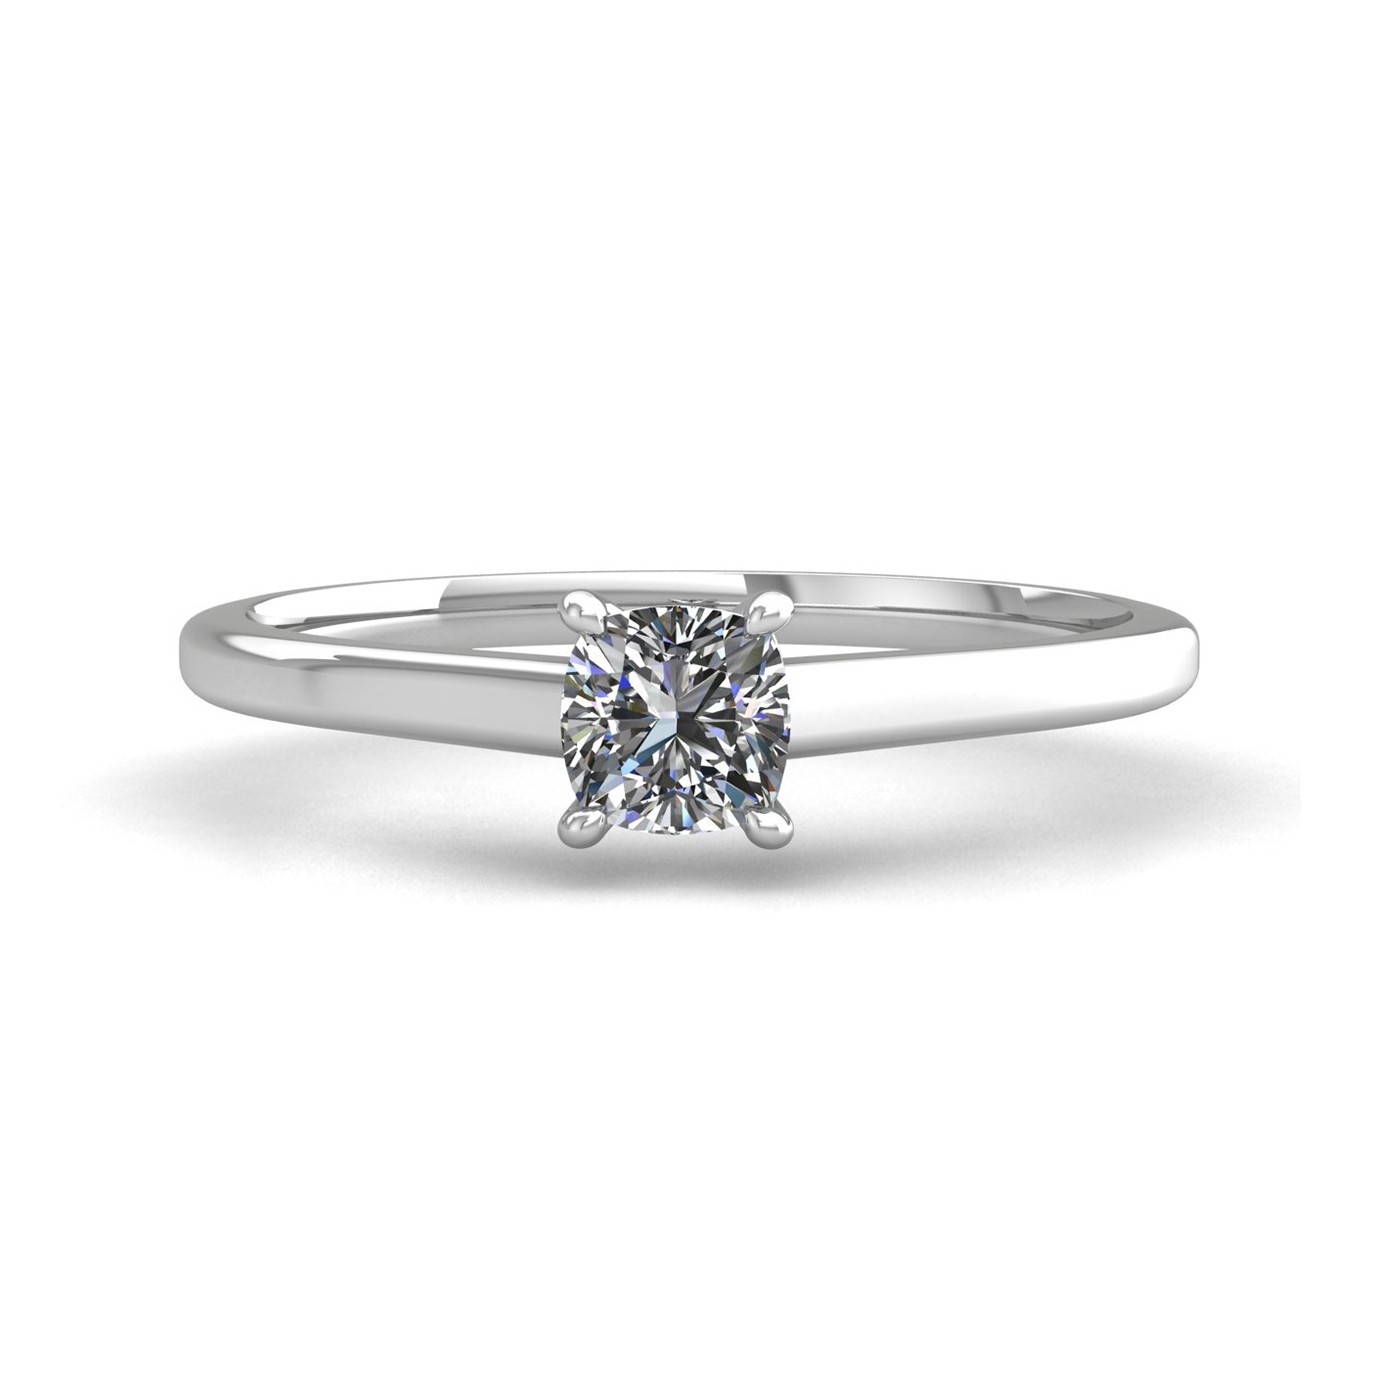 18k white gold 1.2ct 4 prongs solitaire cushion cut diamond engagement ring with whisper thin band Photos & images